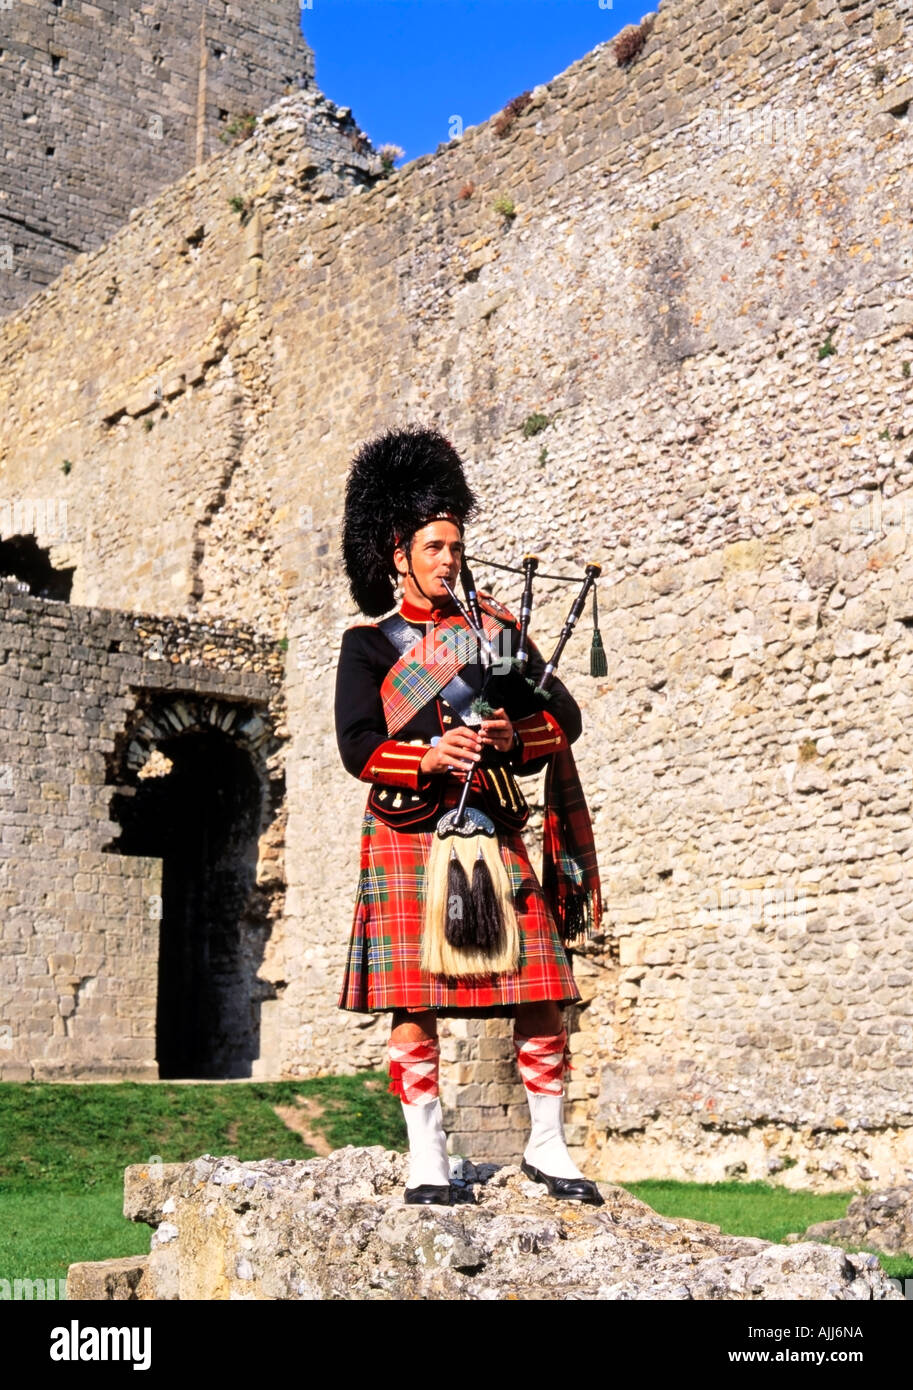 Pipers, Piper On Bagpipes Stock Photo